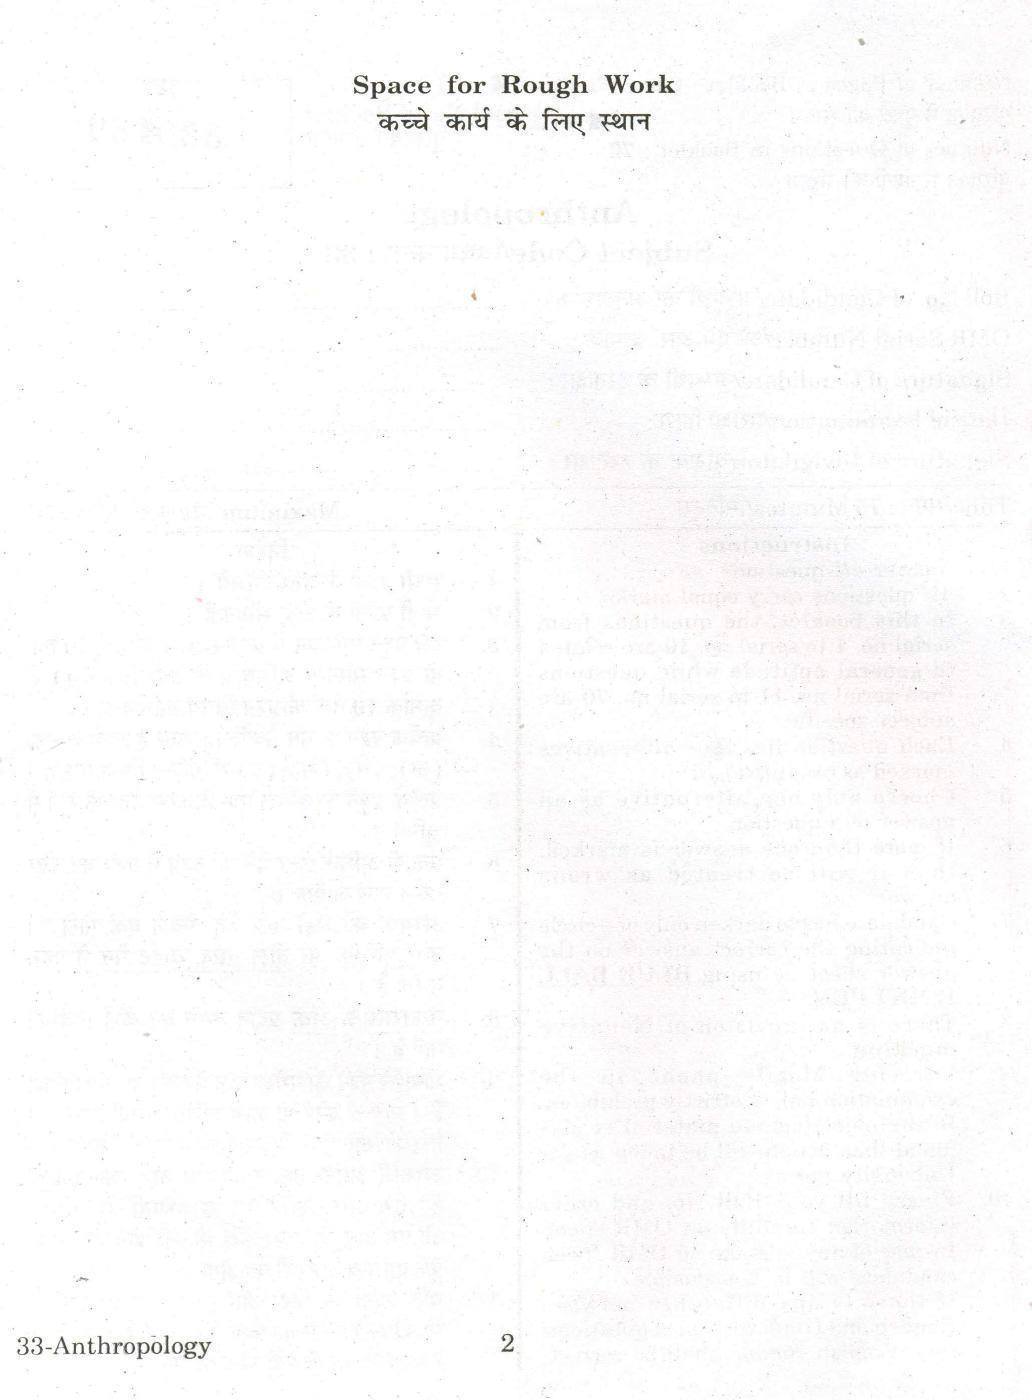 URATPG Anthropology 2013 Question Paper - Page 2